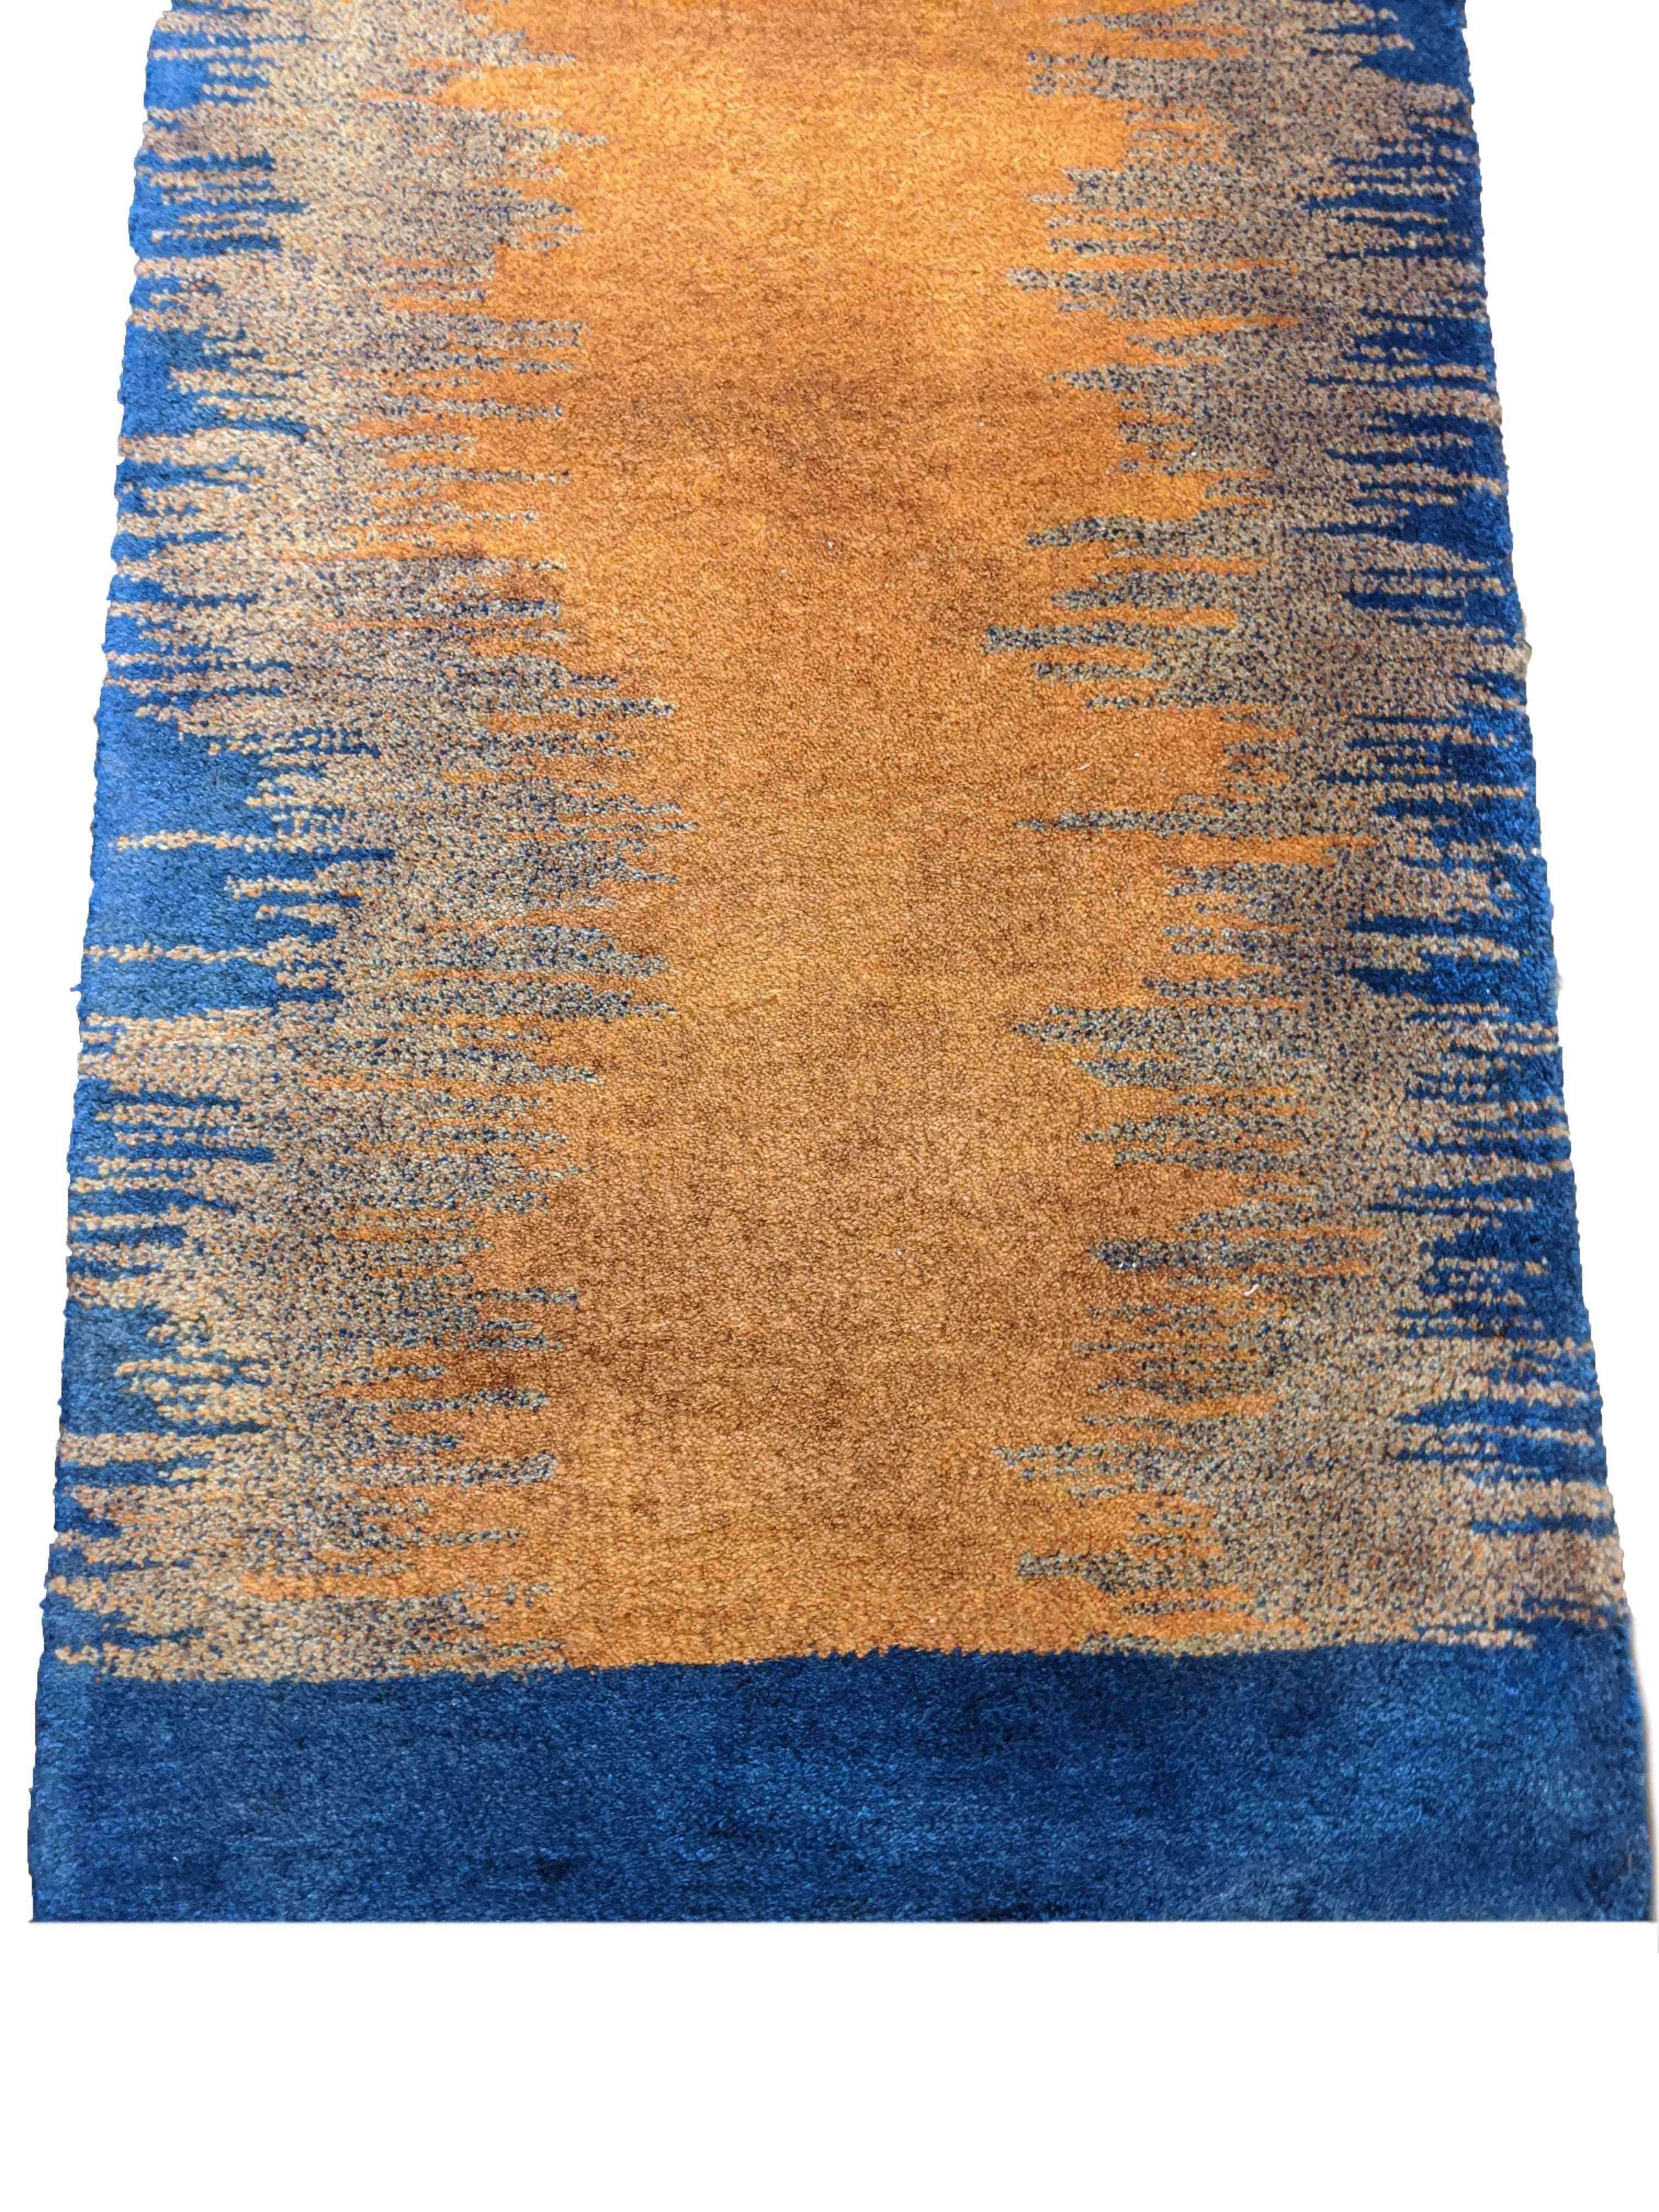 276 x 63 cm Contemporary master exclusive Yellow Rug - Rugmaster